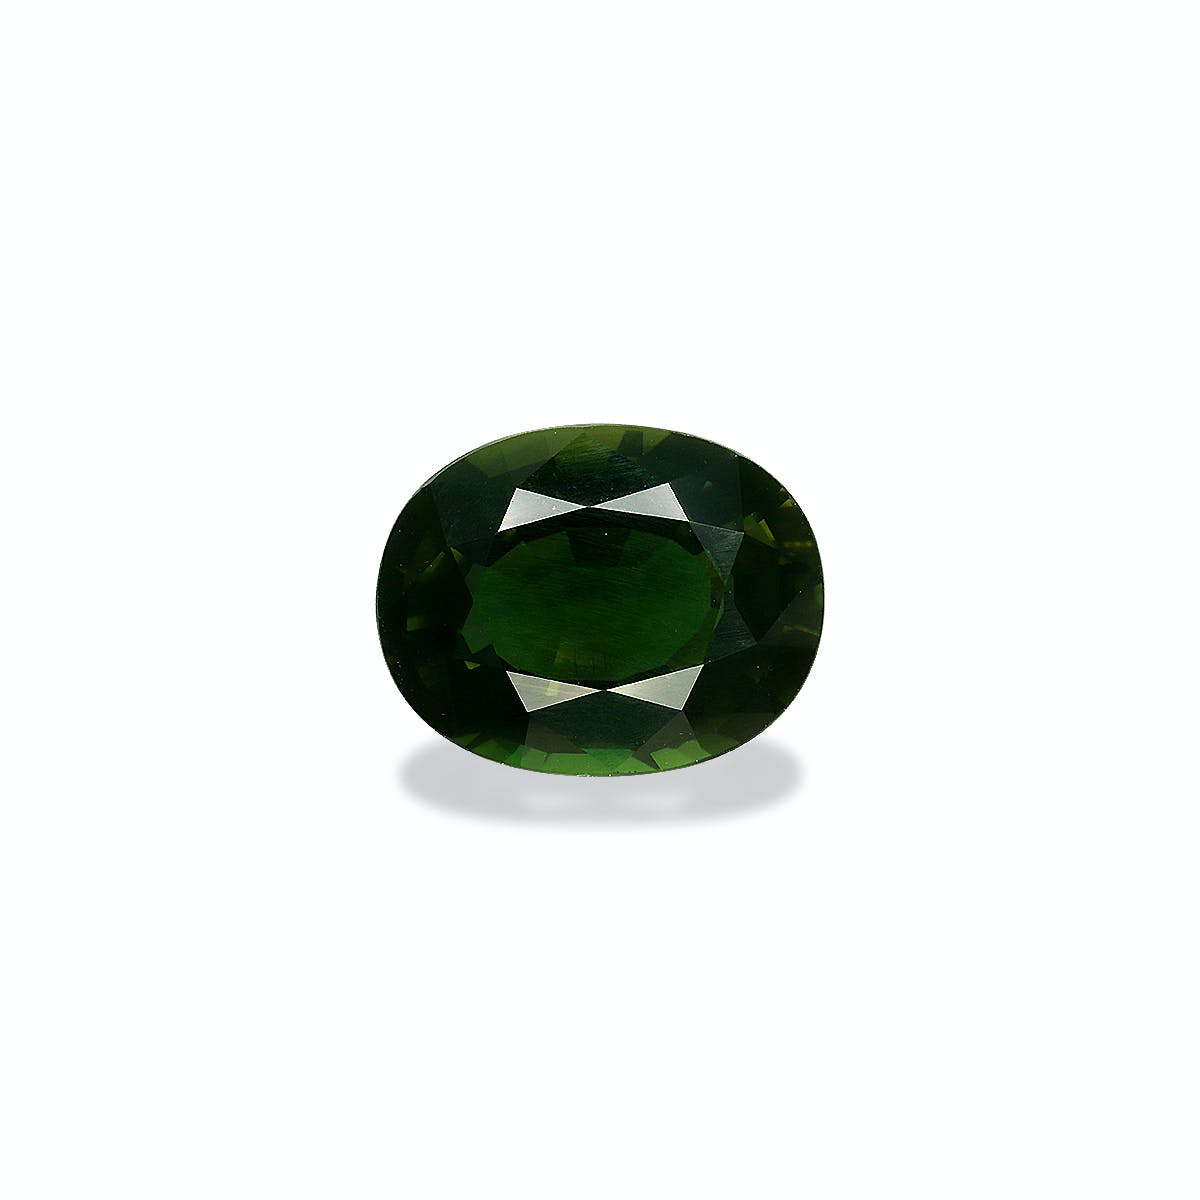 Picture of Basil Green Chrome Tourmaline 5.82ct (CT0225)